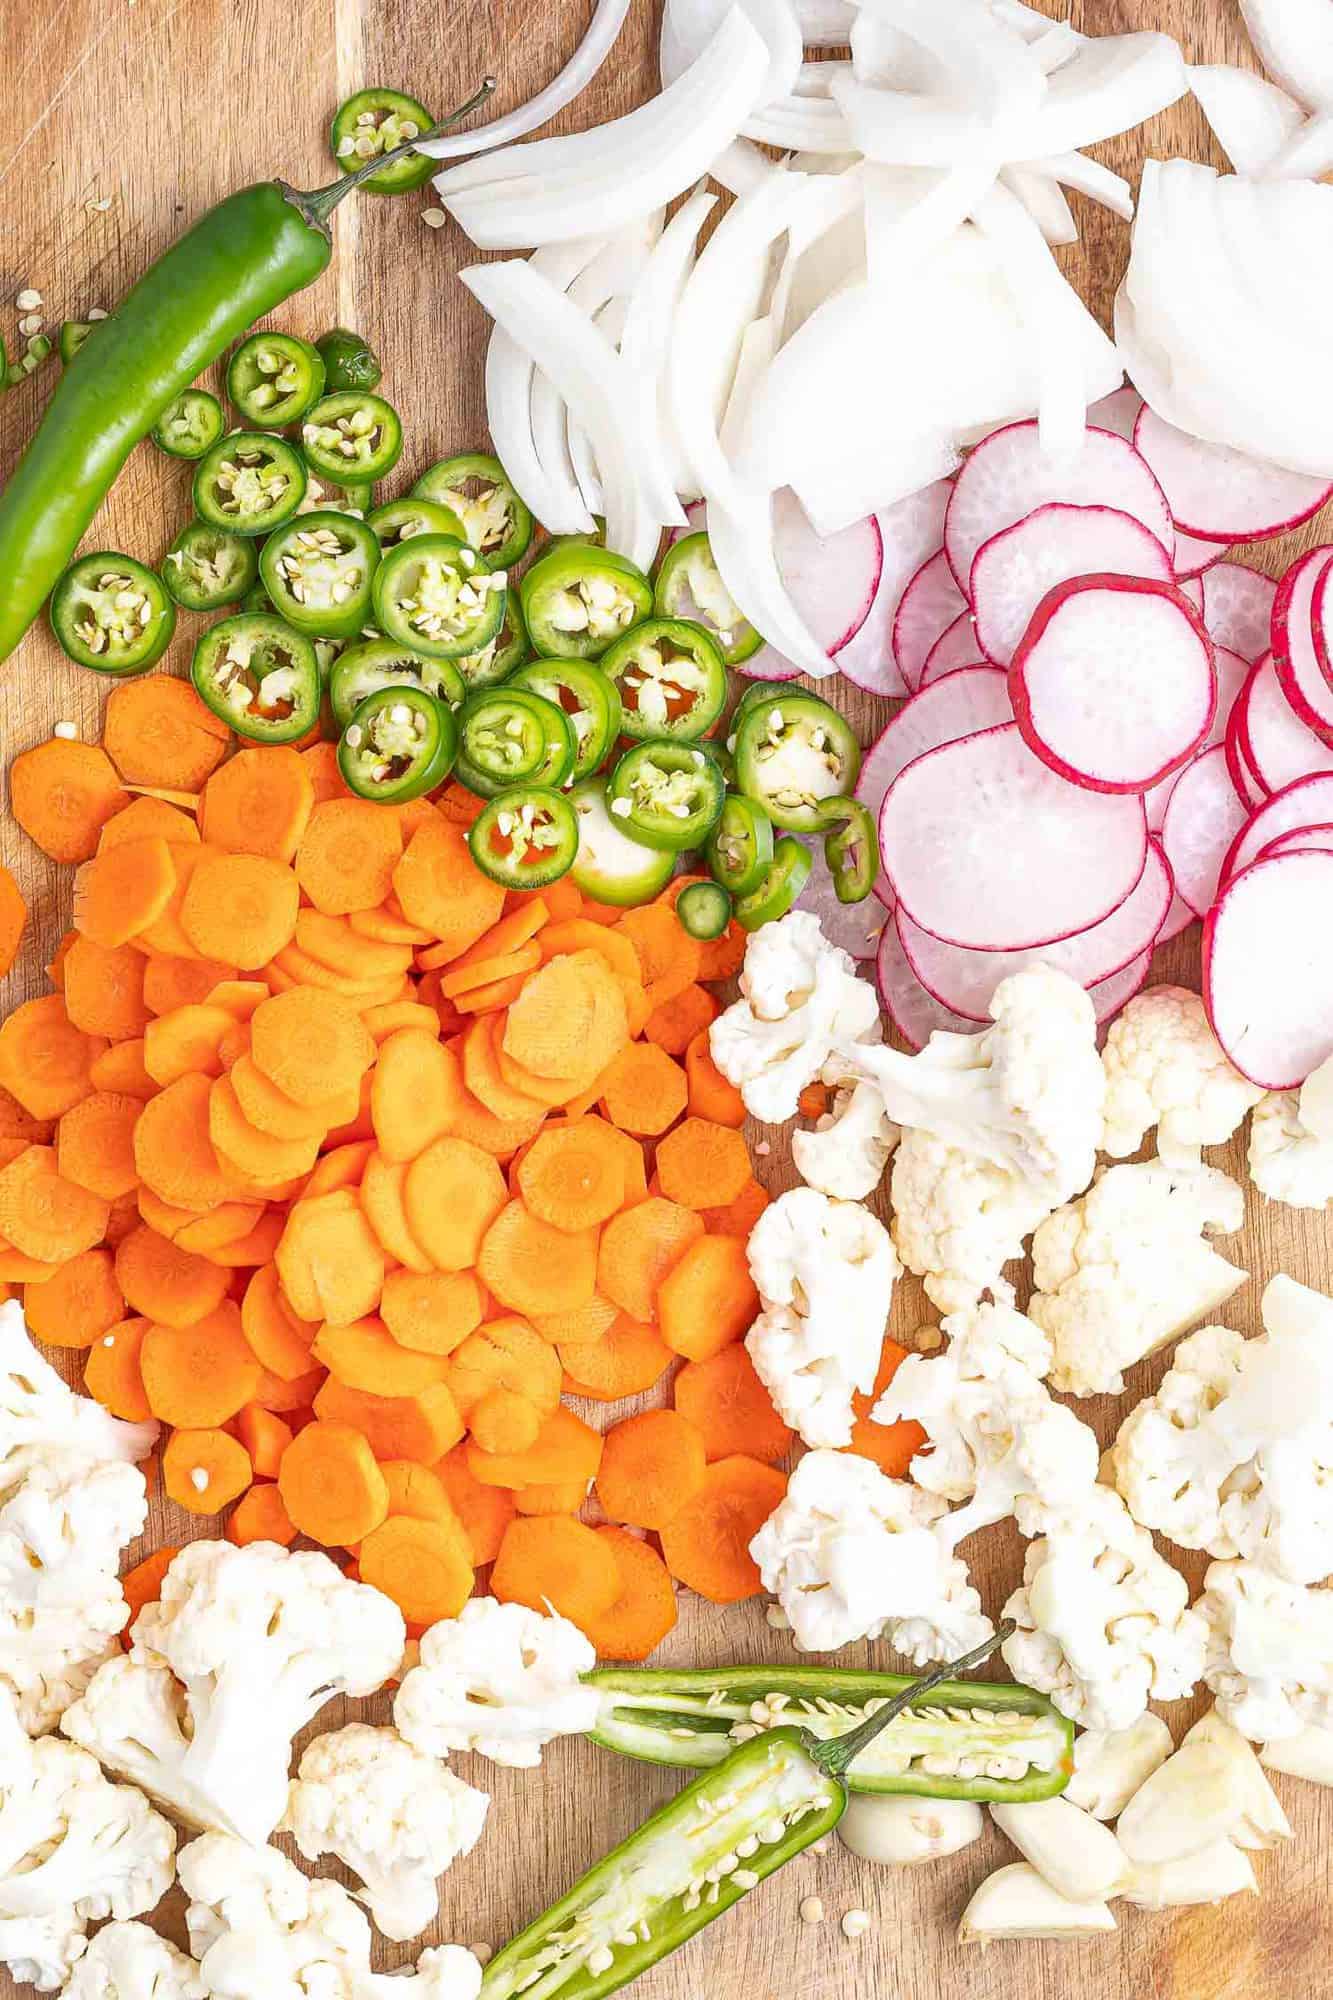 Assorted cut vegetables on a wooden surface: radishes, jalapeno, carrots, cauliflower, and onion.